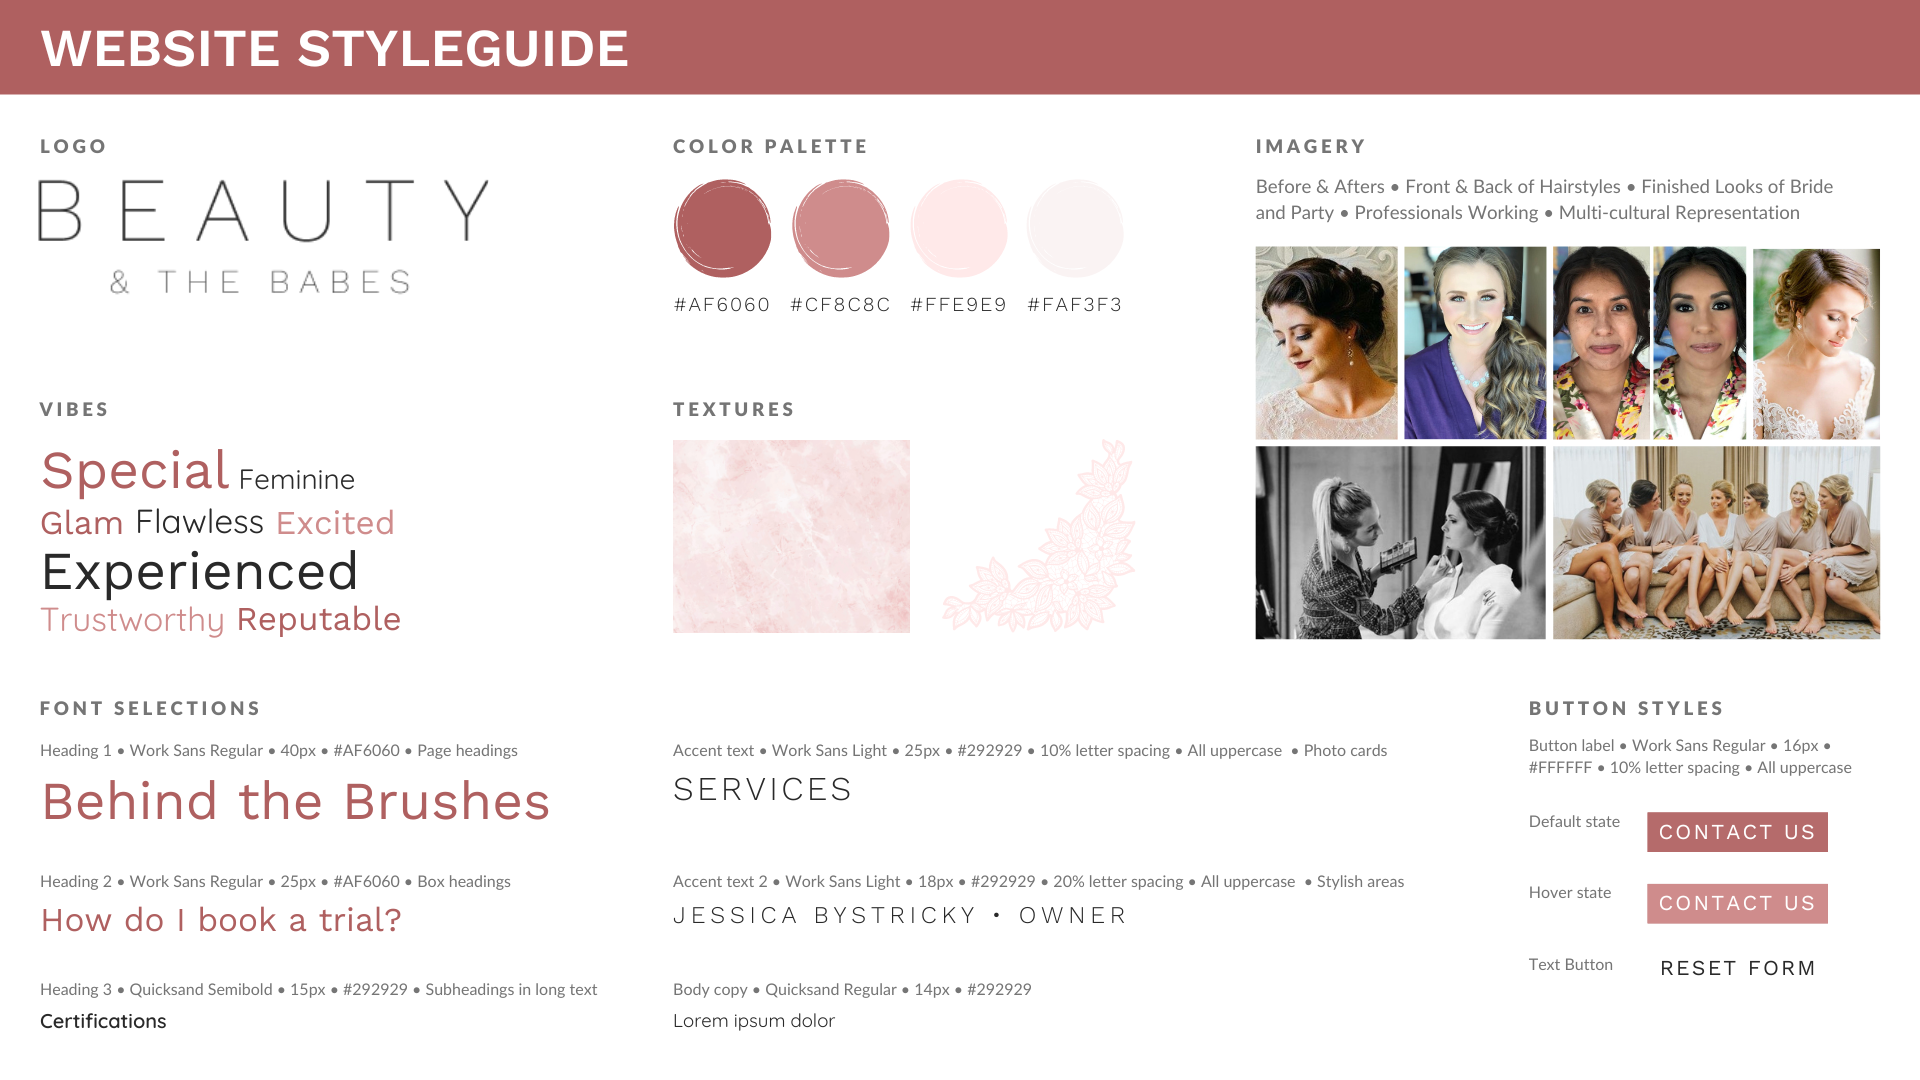 Image of website style guide